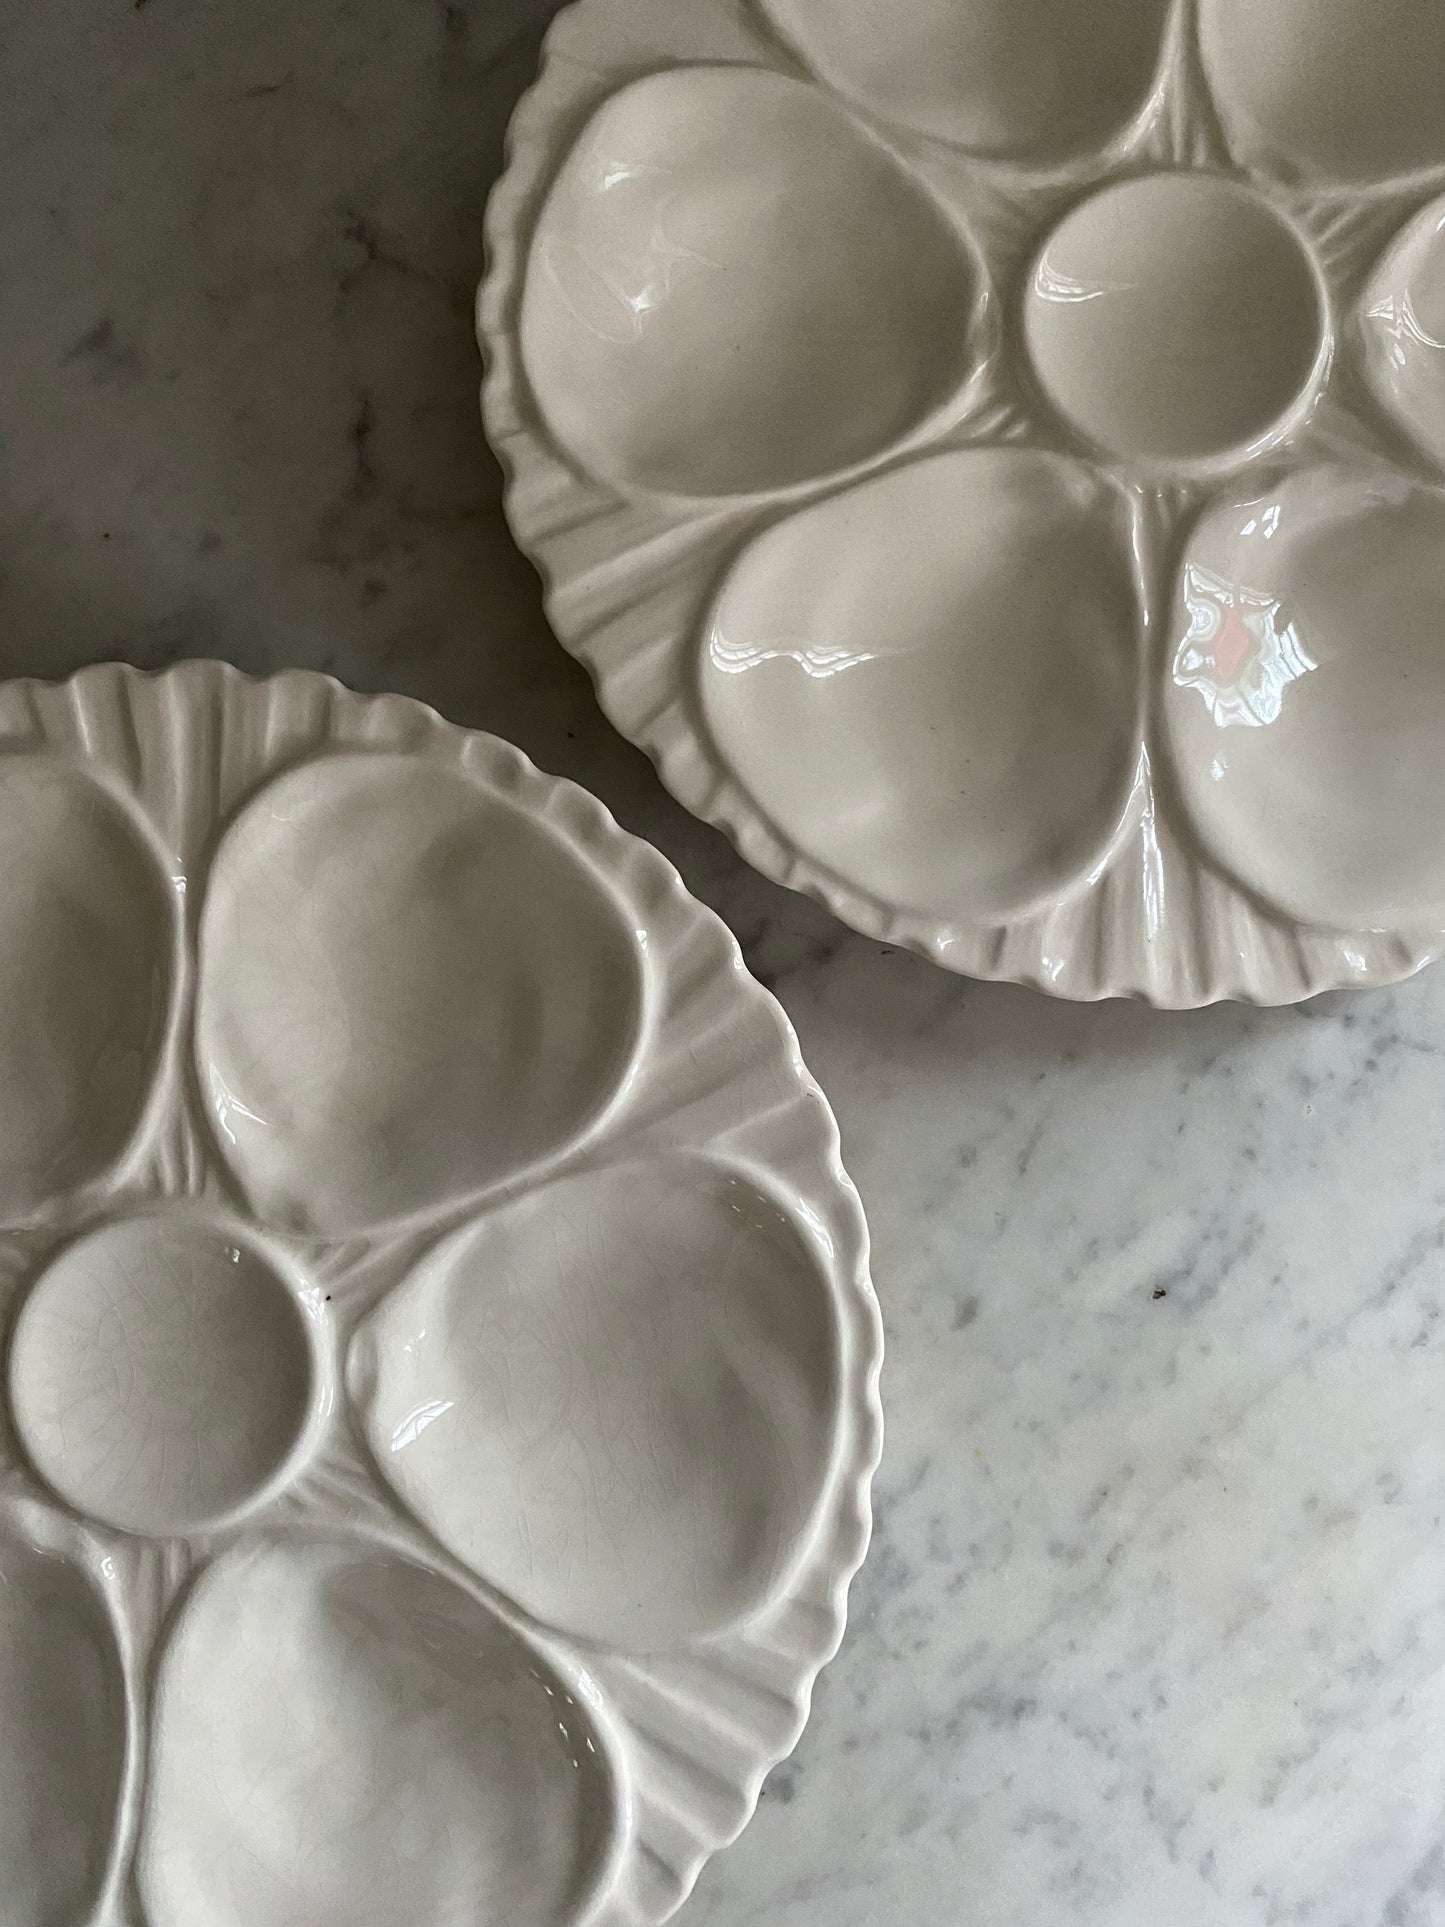 Two vintage oyster platters